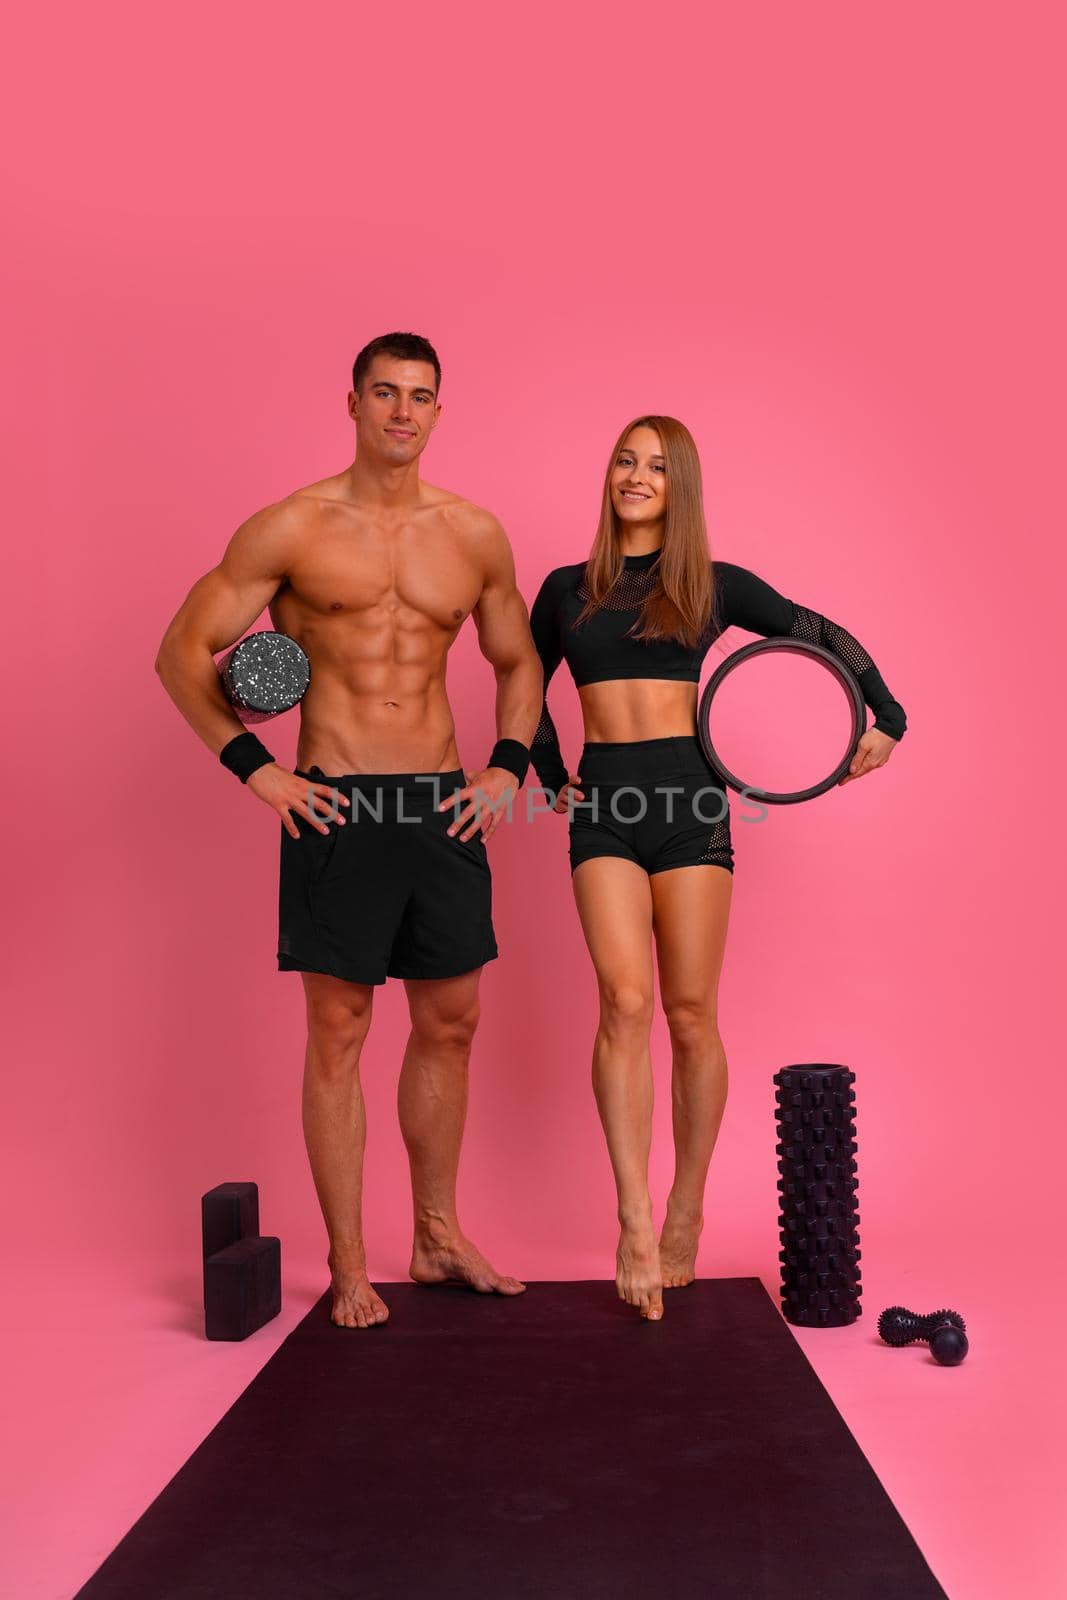 Fit couple at the gym isolated on pink background. Fitness concept. Healthy life style